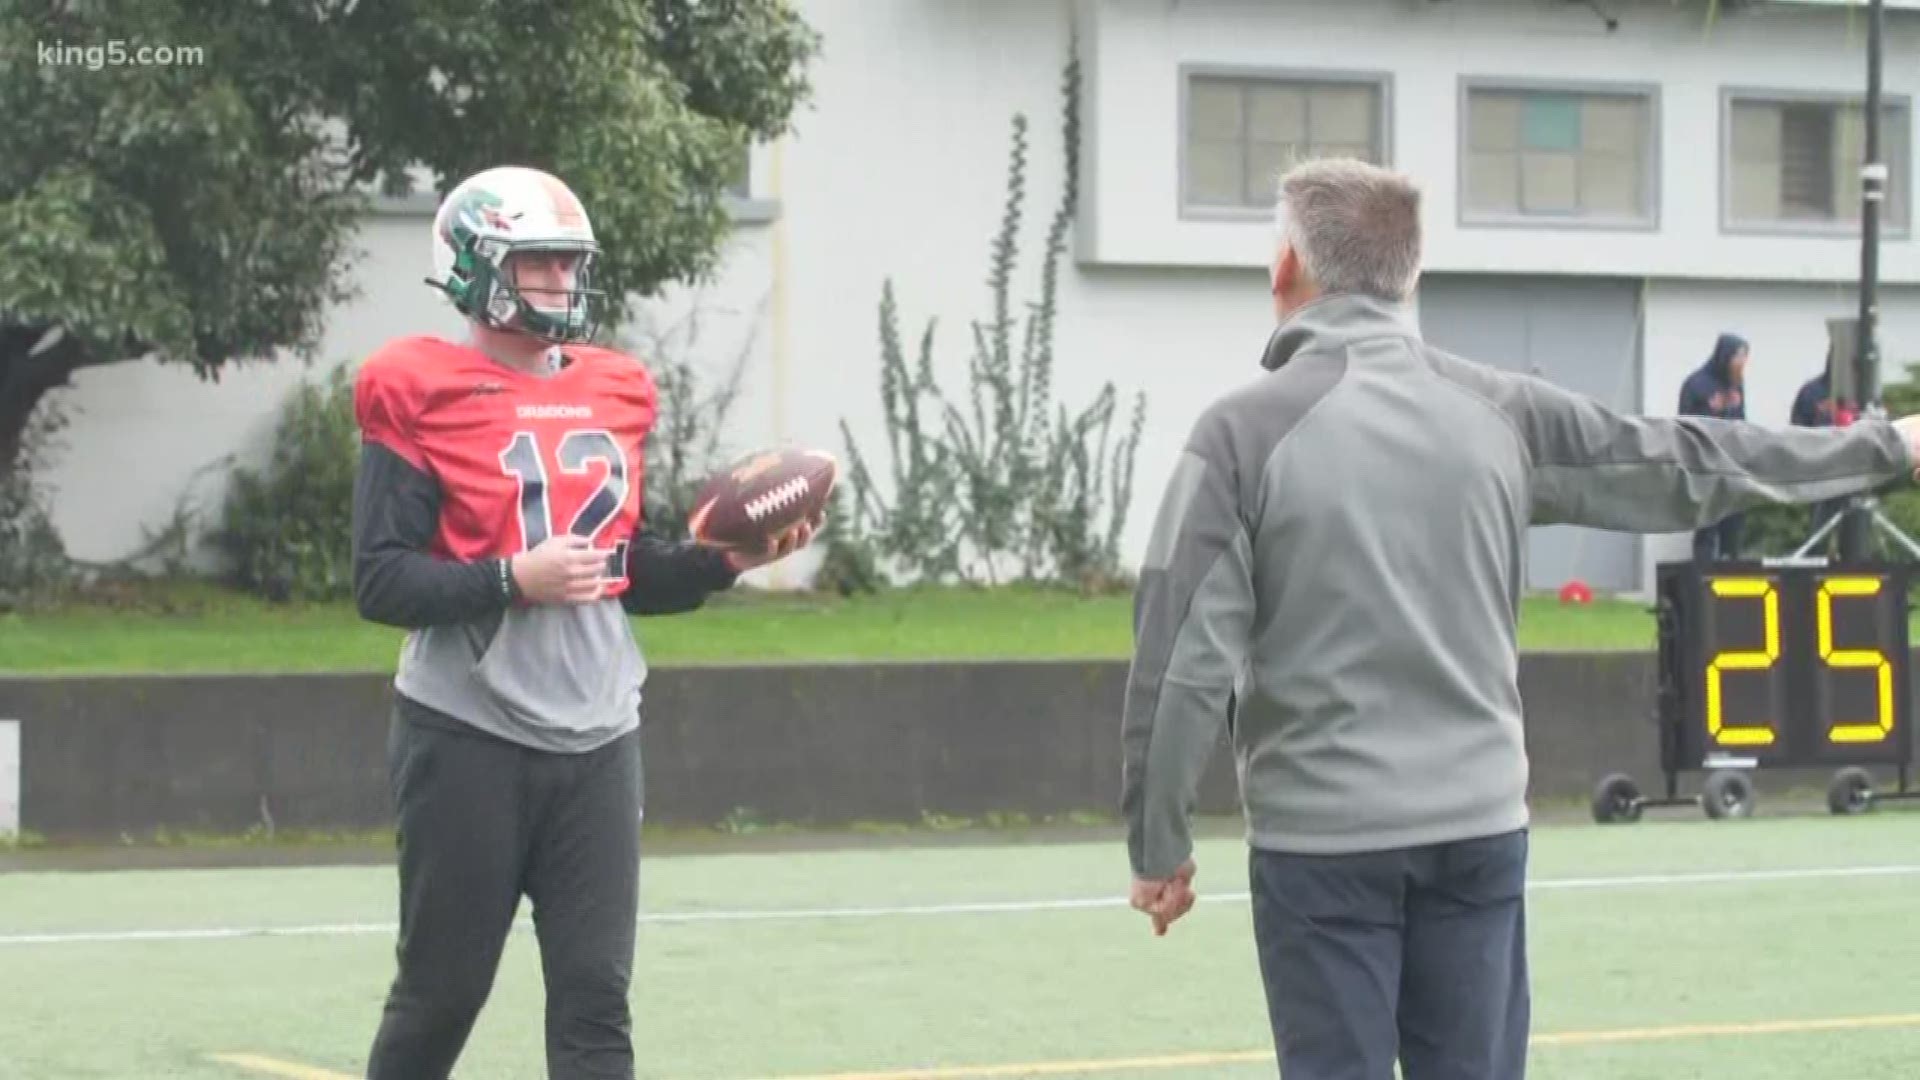 The XFL League is underway and the Seattle Dragons face off against the Tampa Bay Vipers Saturday at 2 p.m. at CenturyLink Field in their home opener.